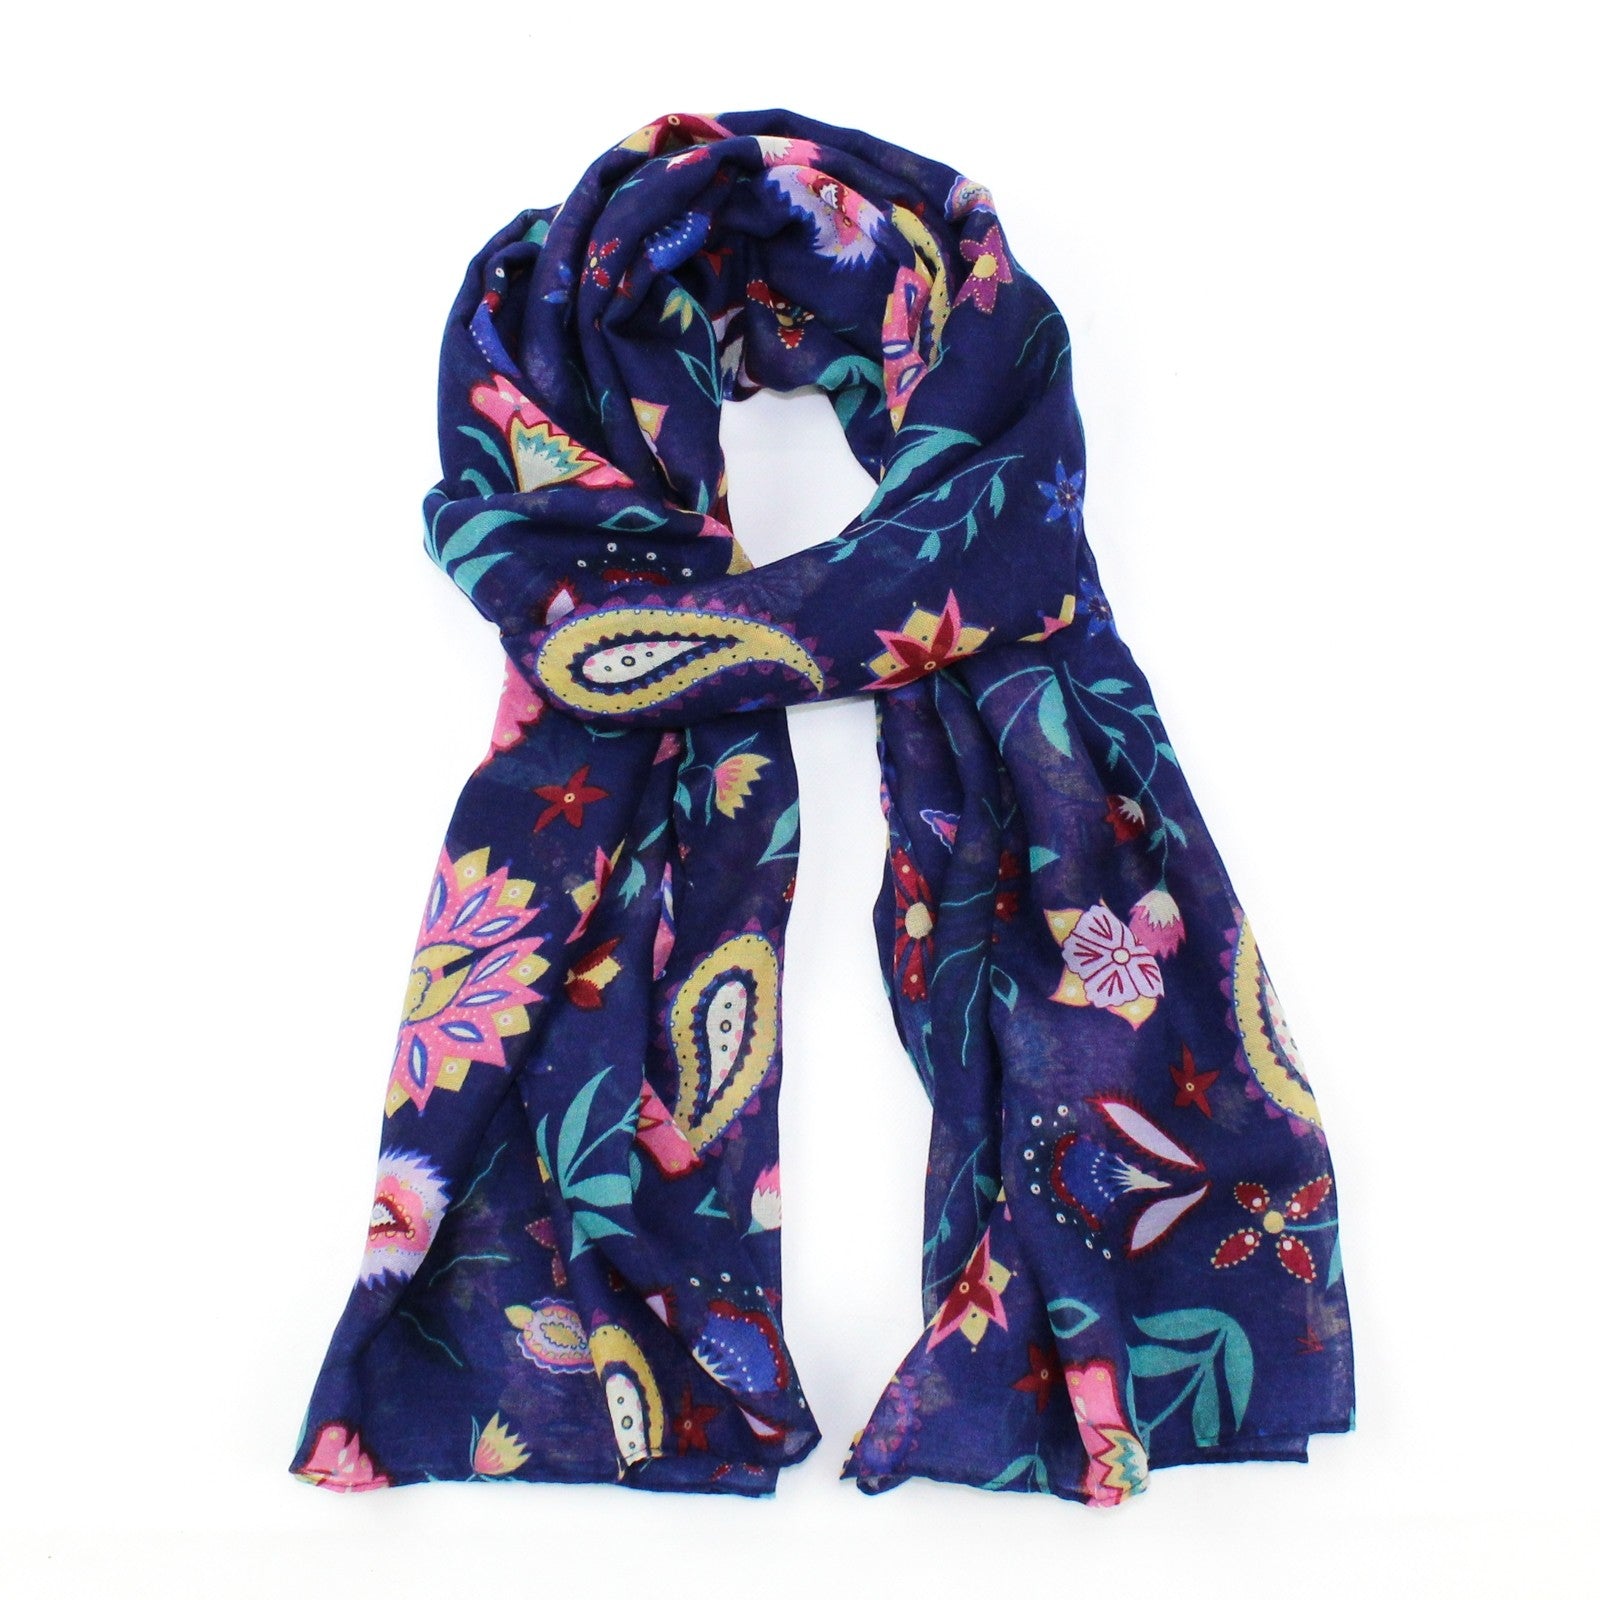 With it's unique boho style this pretty blue scarf with paisley and floral print is perfect for summer festivals and holidays.